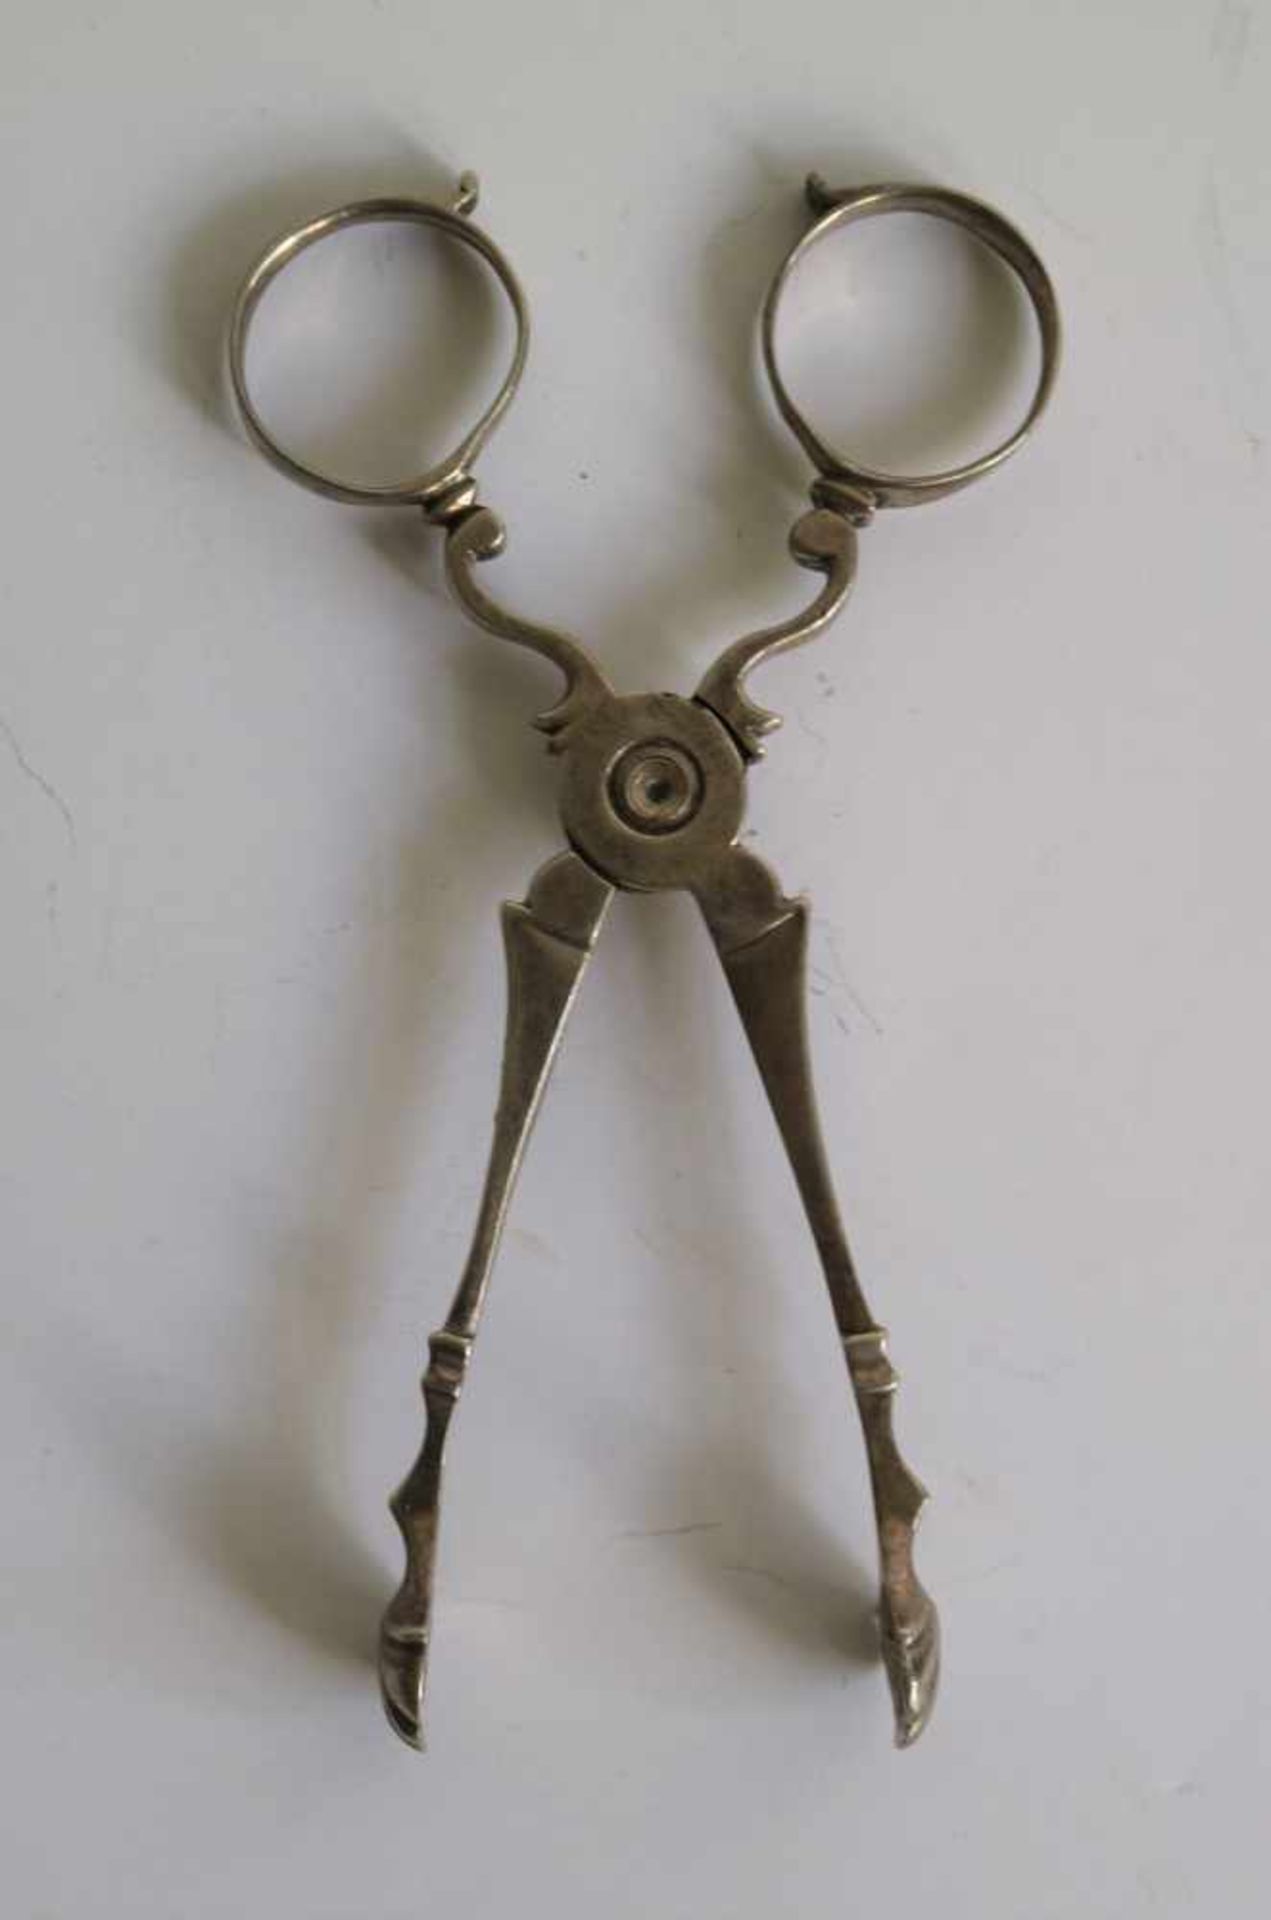 English silver sugar tongs 18th century L 10,5 cm marked - Image 2 of 4